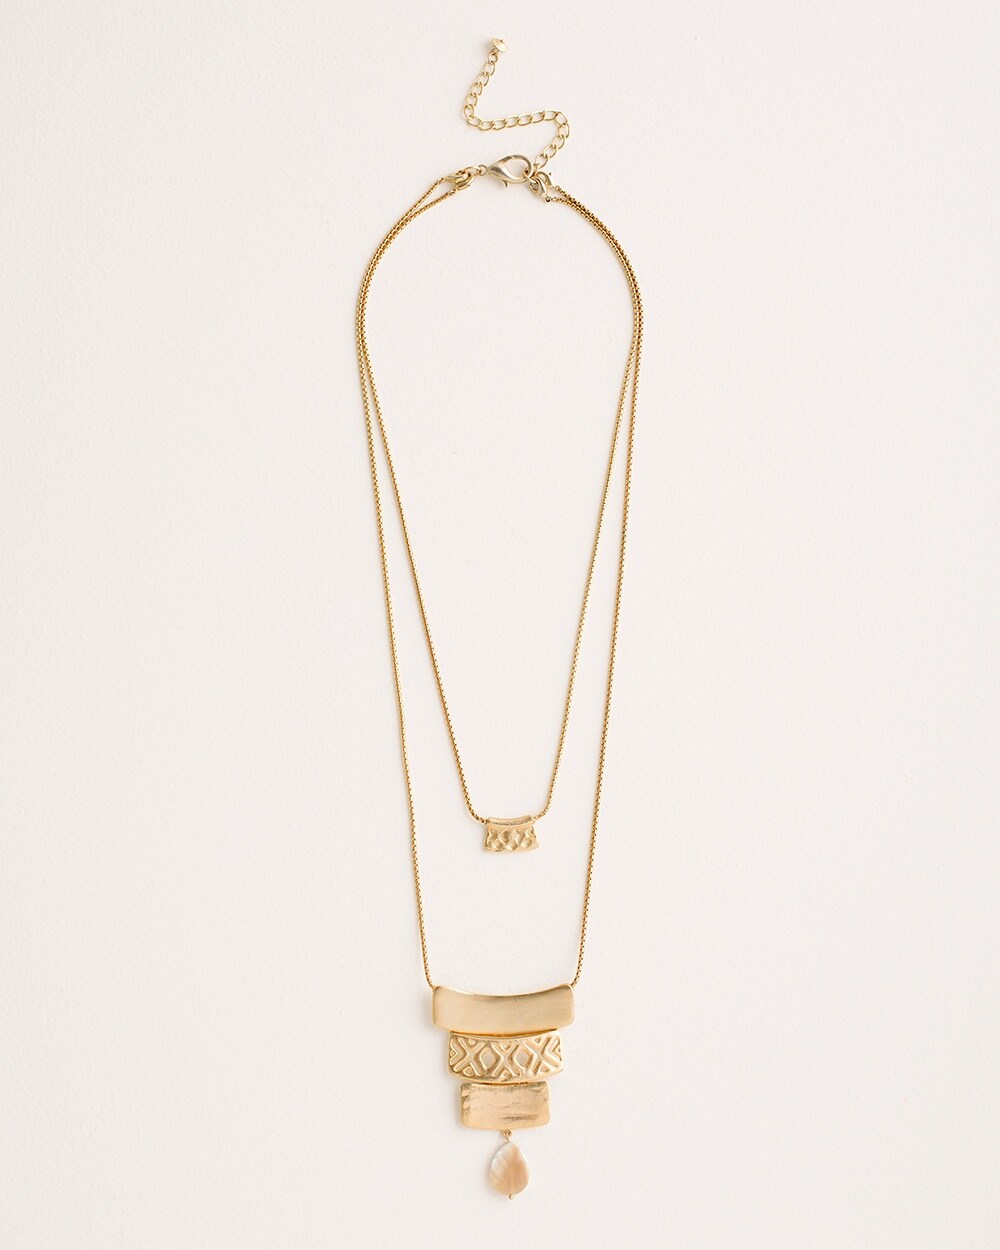 Goldtone Multistrand Convertible Necklace